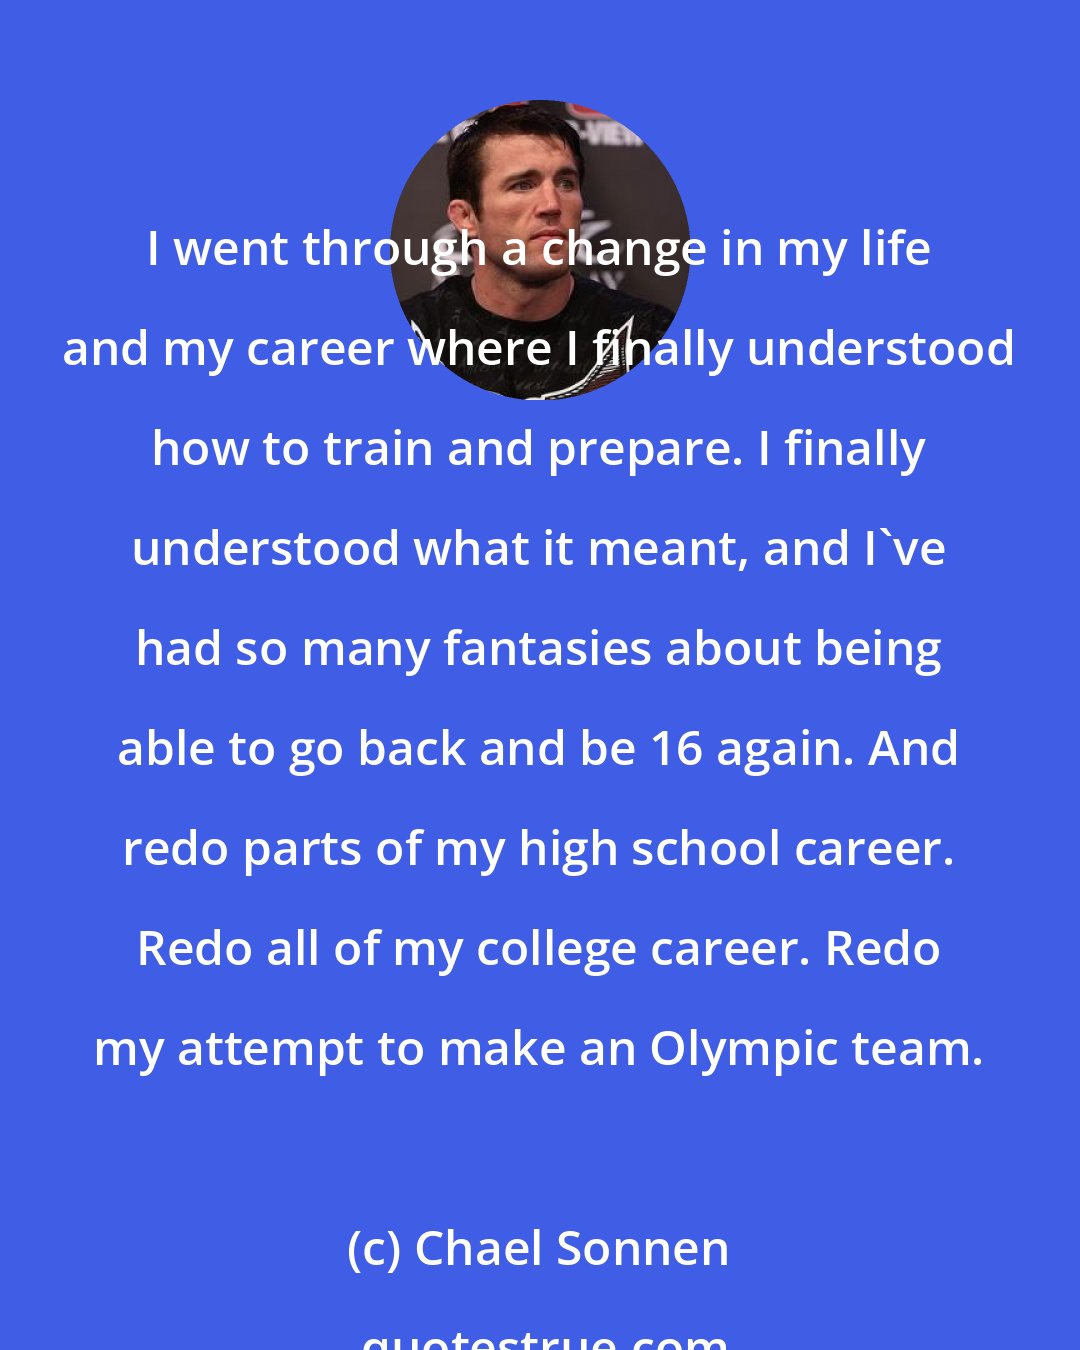 Chael Sonnen: I went through a change in my life and my career where I finally understood how to train and prepare. I finally understood what it meant, and I've had so many fantasies about being able to go back and be 16 again. And redo parts of my high school career. Redo all of my college career. Redo my attempt to make an Olympic team.